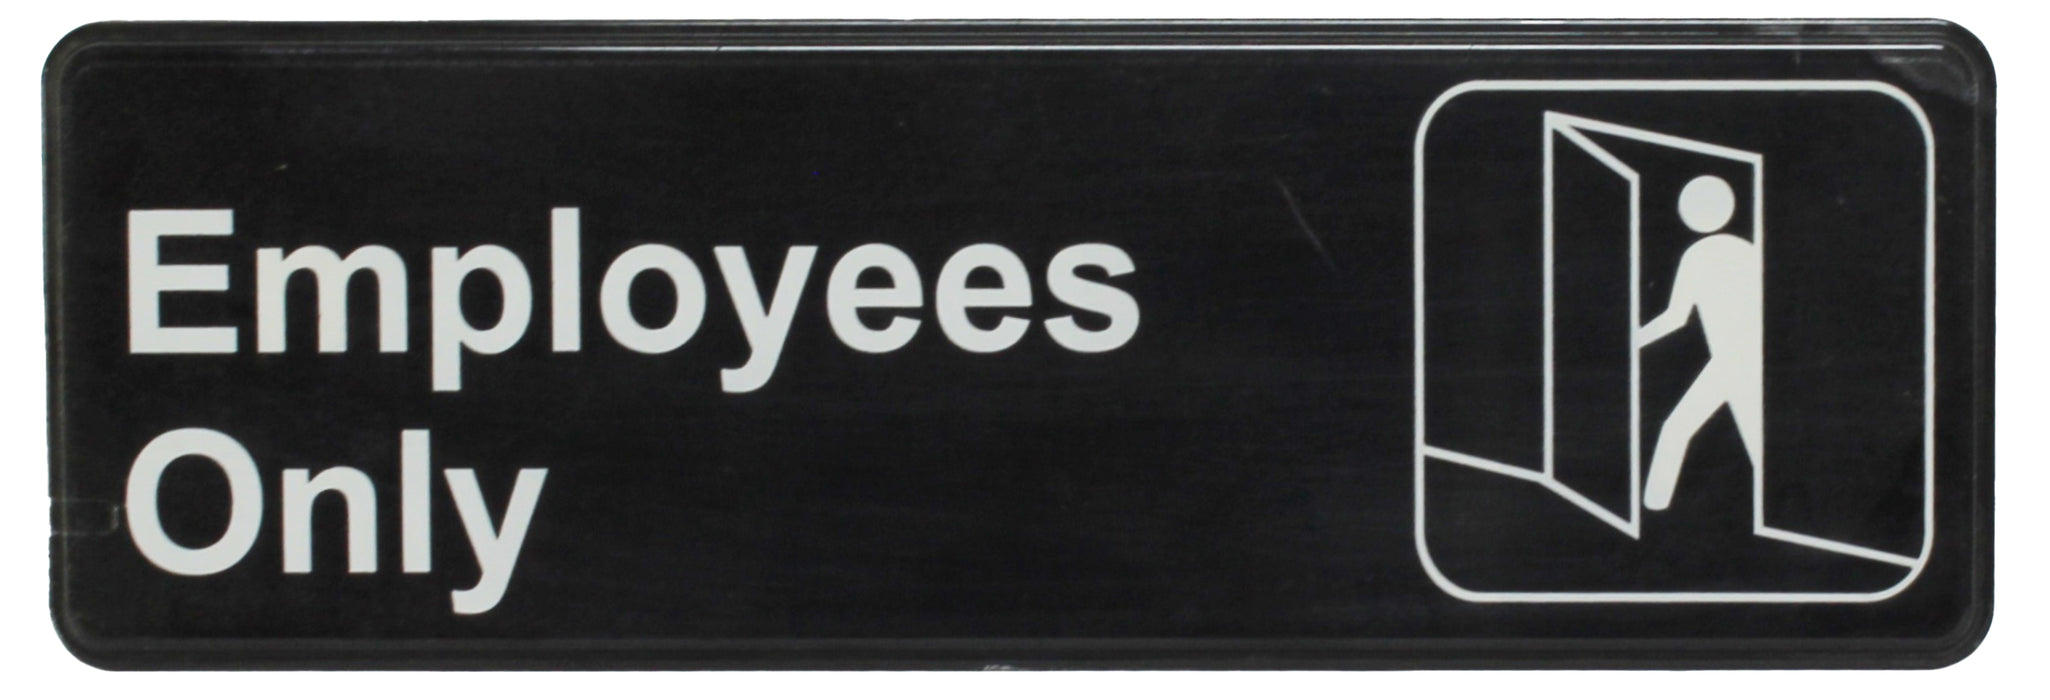 Sign 9" x 3" x 1/8", Employees Only QTY-12-cityfoodequipment.com